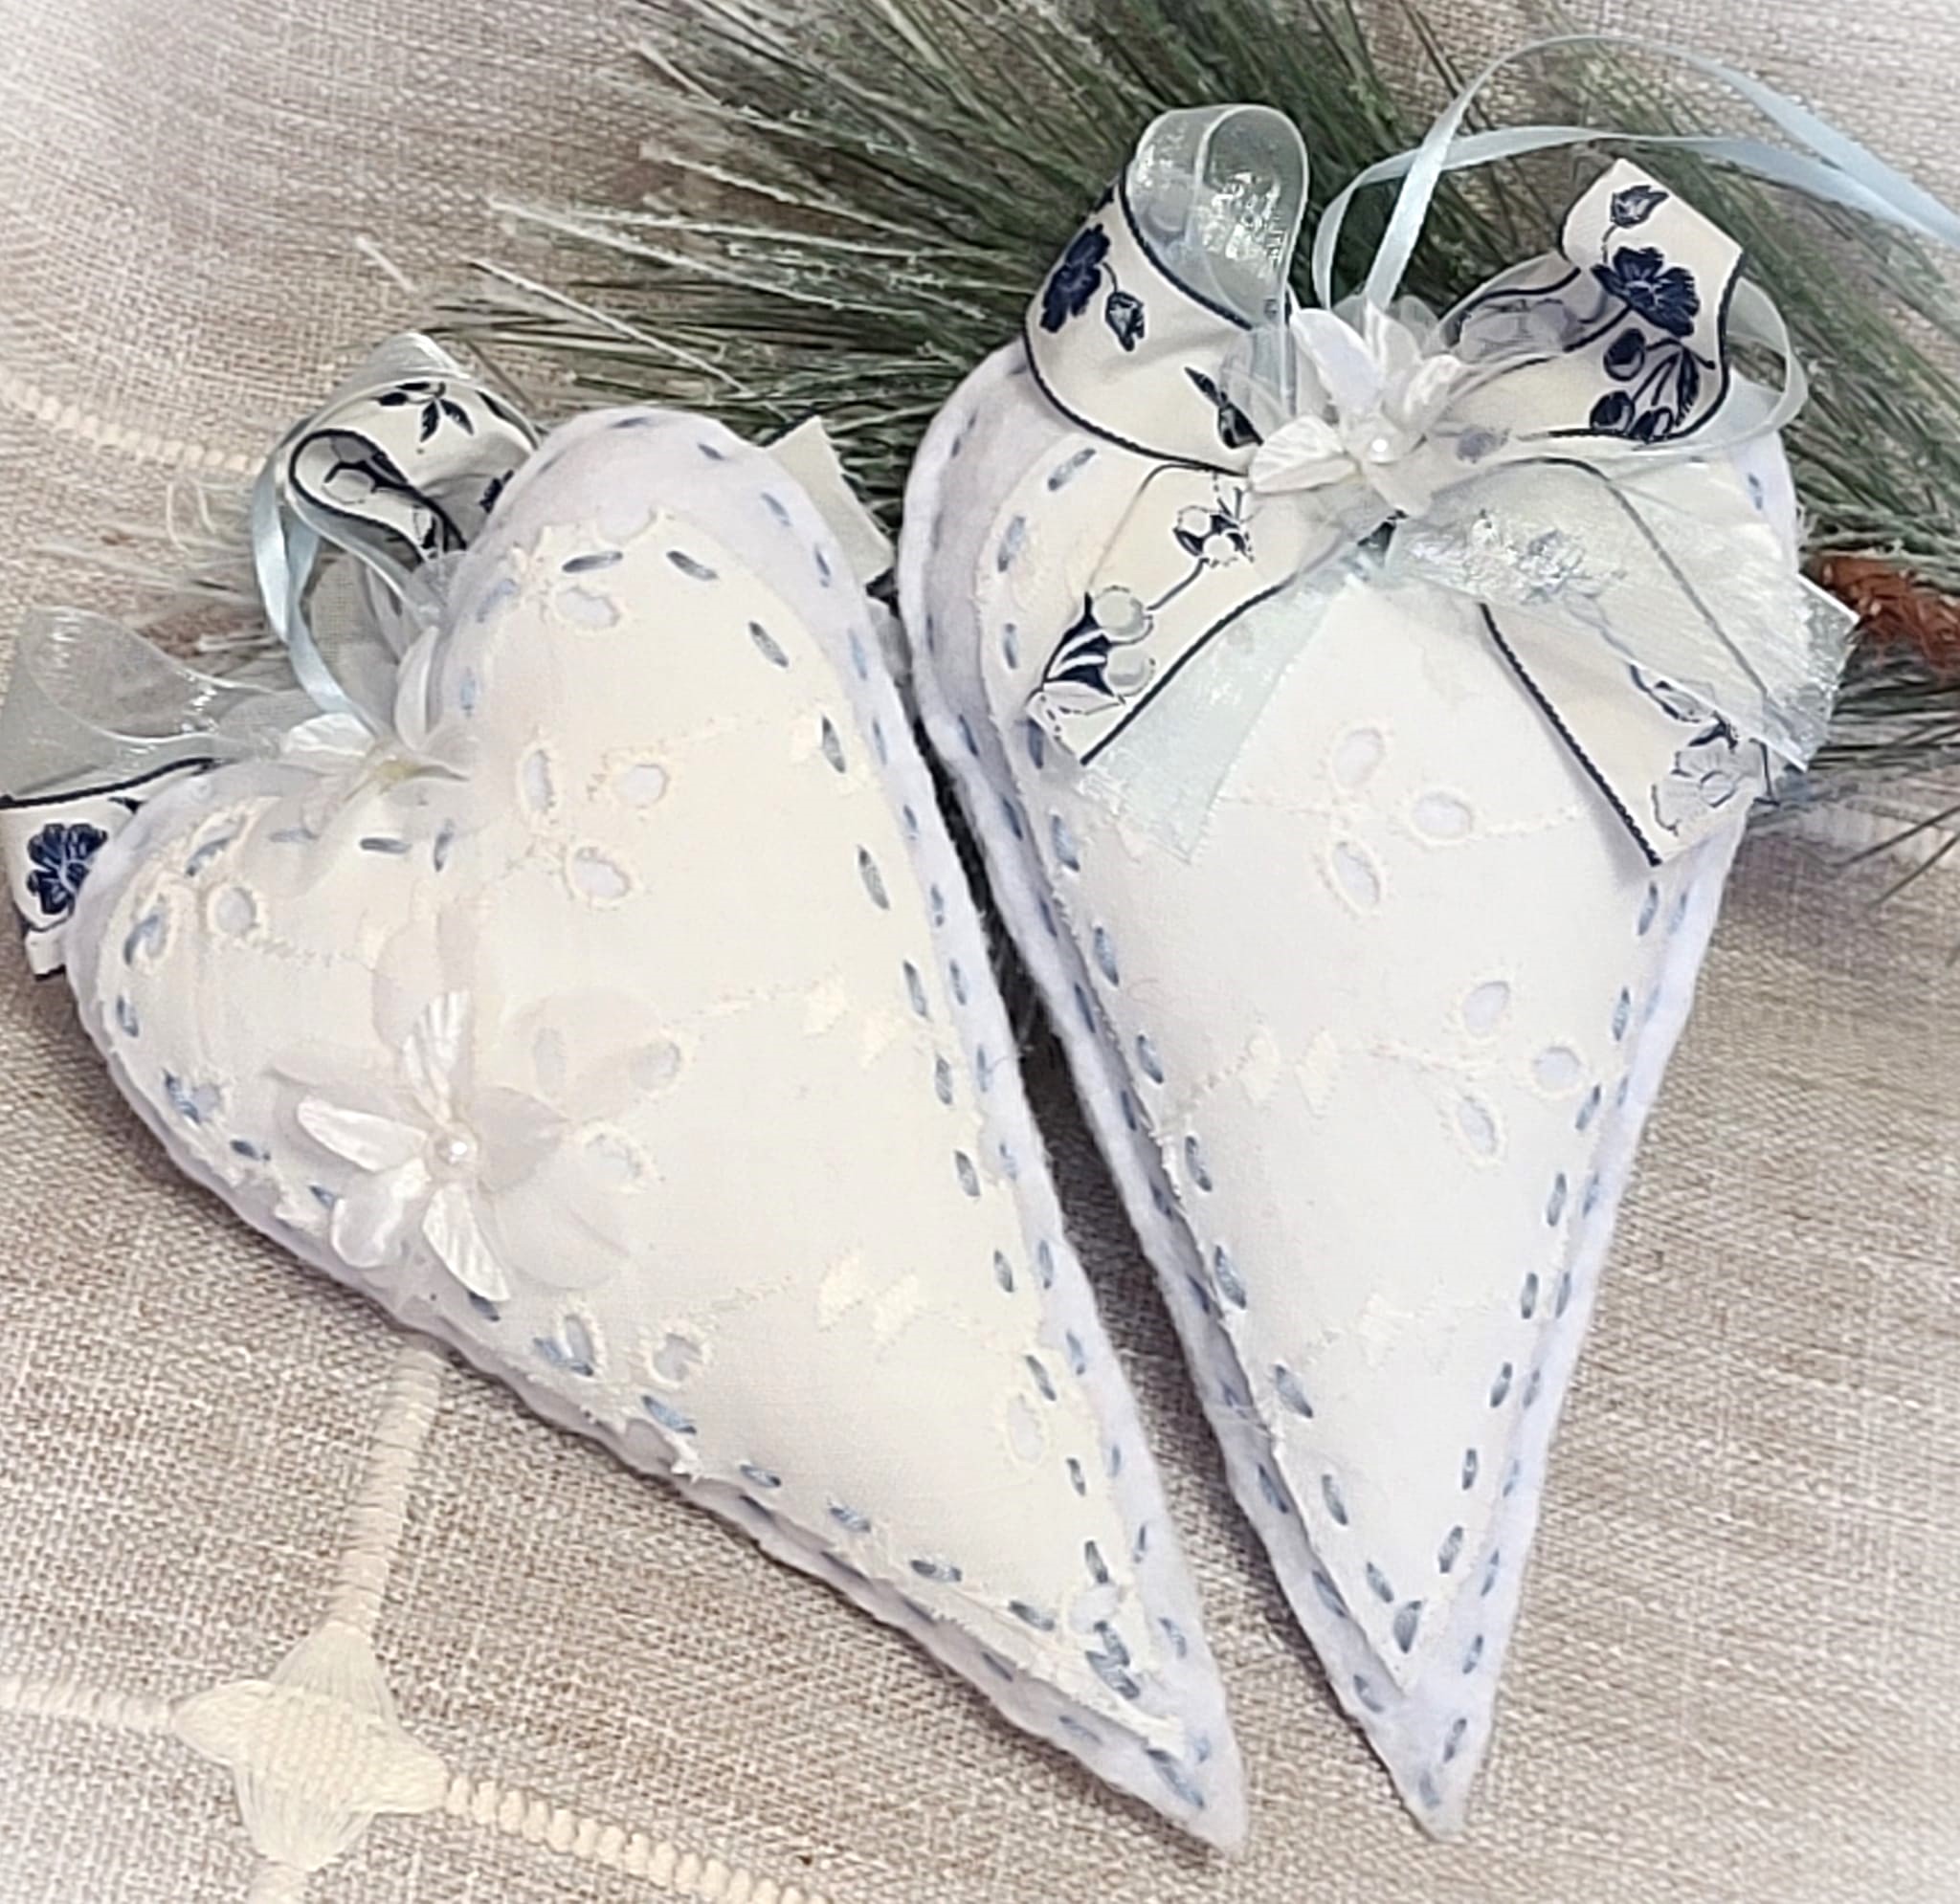 Pale Blue felt and eyelet lace heart ornaments set of 2 - Click Image to Close